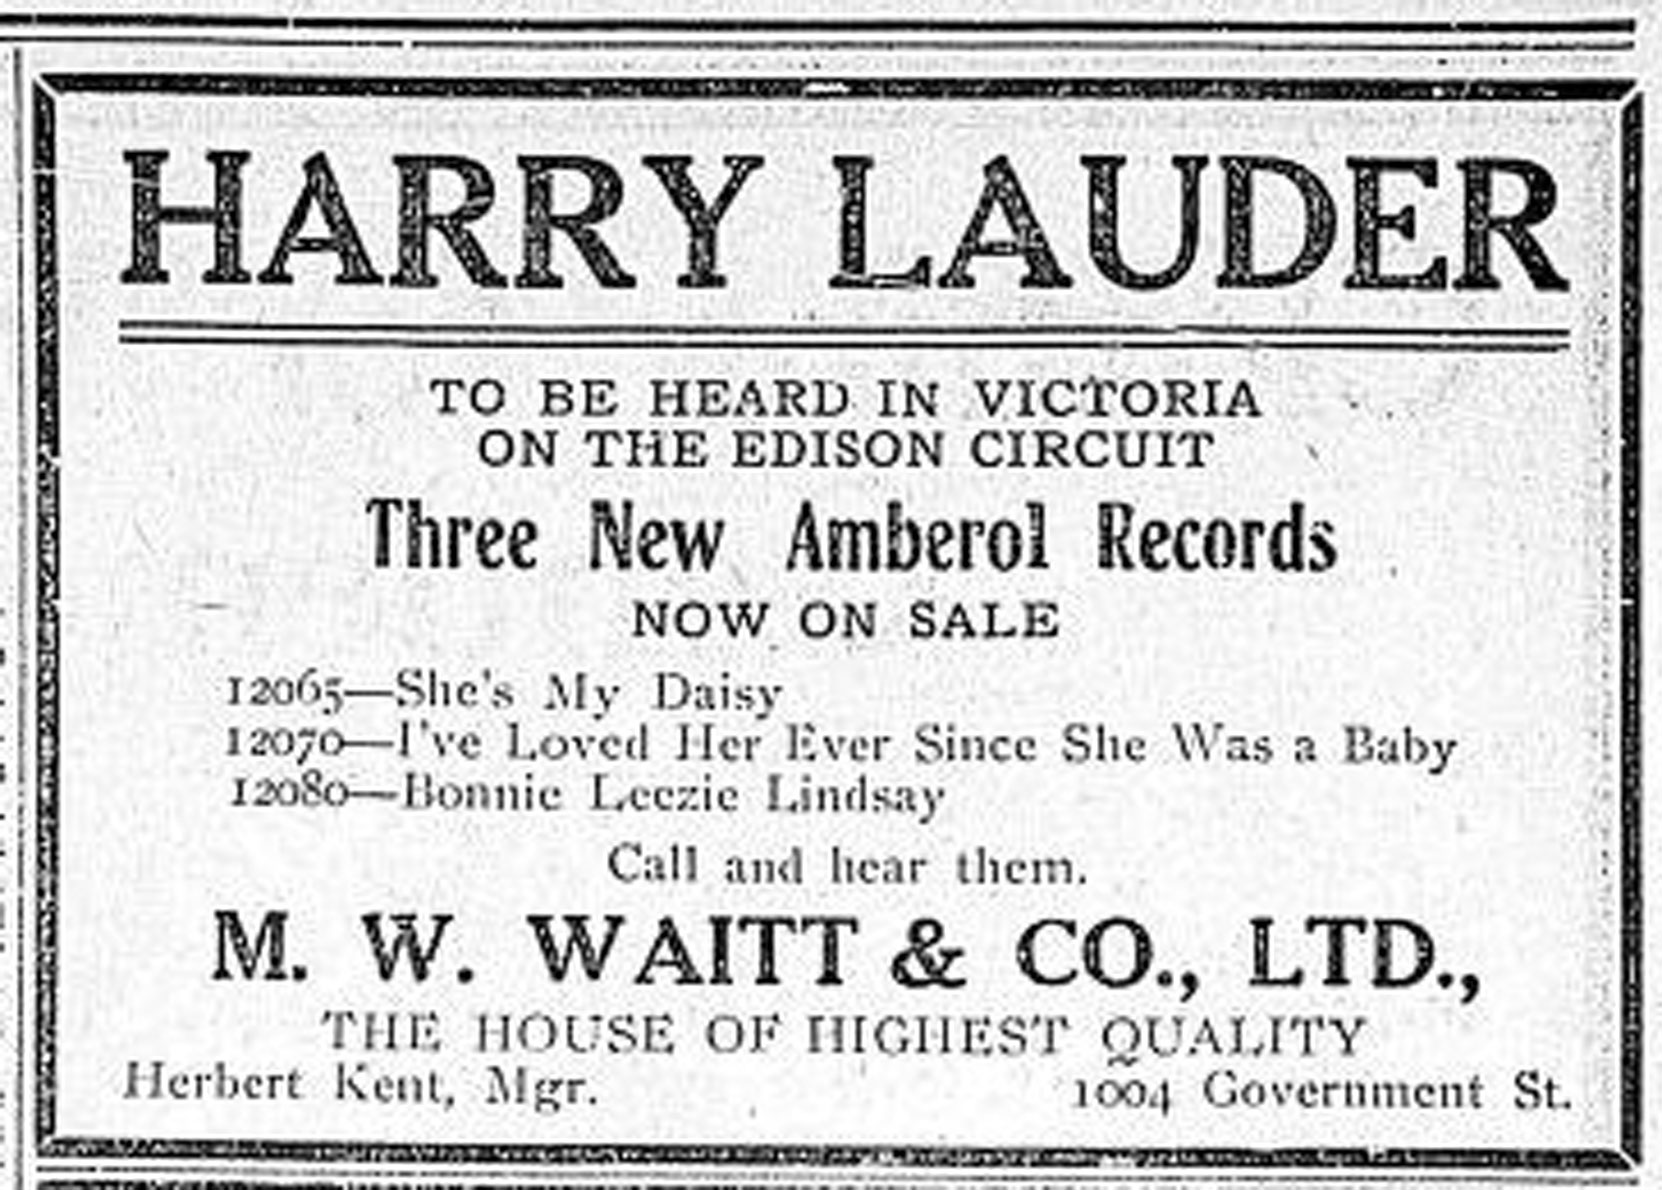 1909 advertisement for Edison Amberol recordings of Harry Lauder, sold by M.W. Waite & Co., which was located in the Vernon Block.